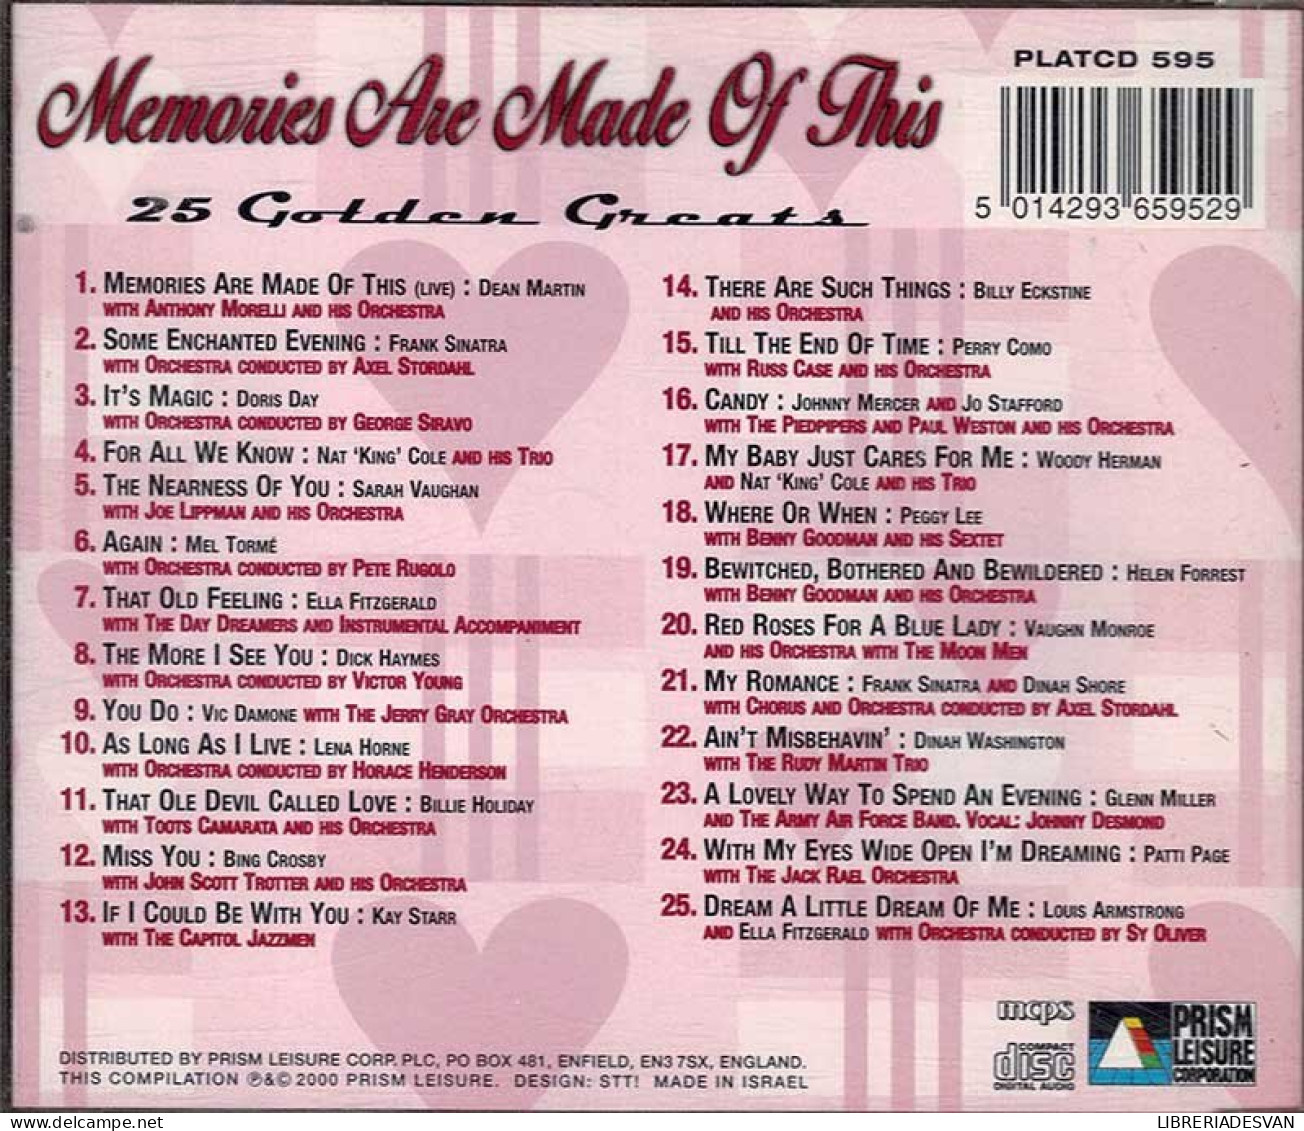 Memories Are Made Of This. CD - Jazz